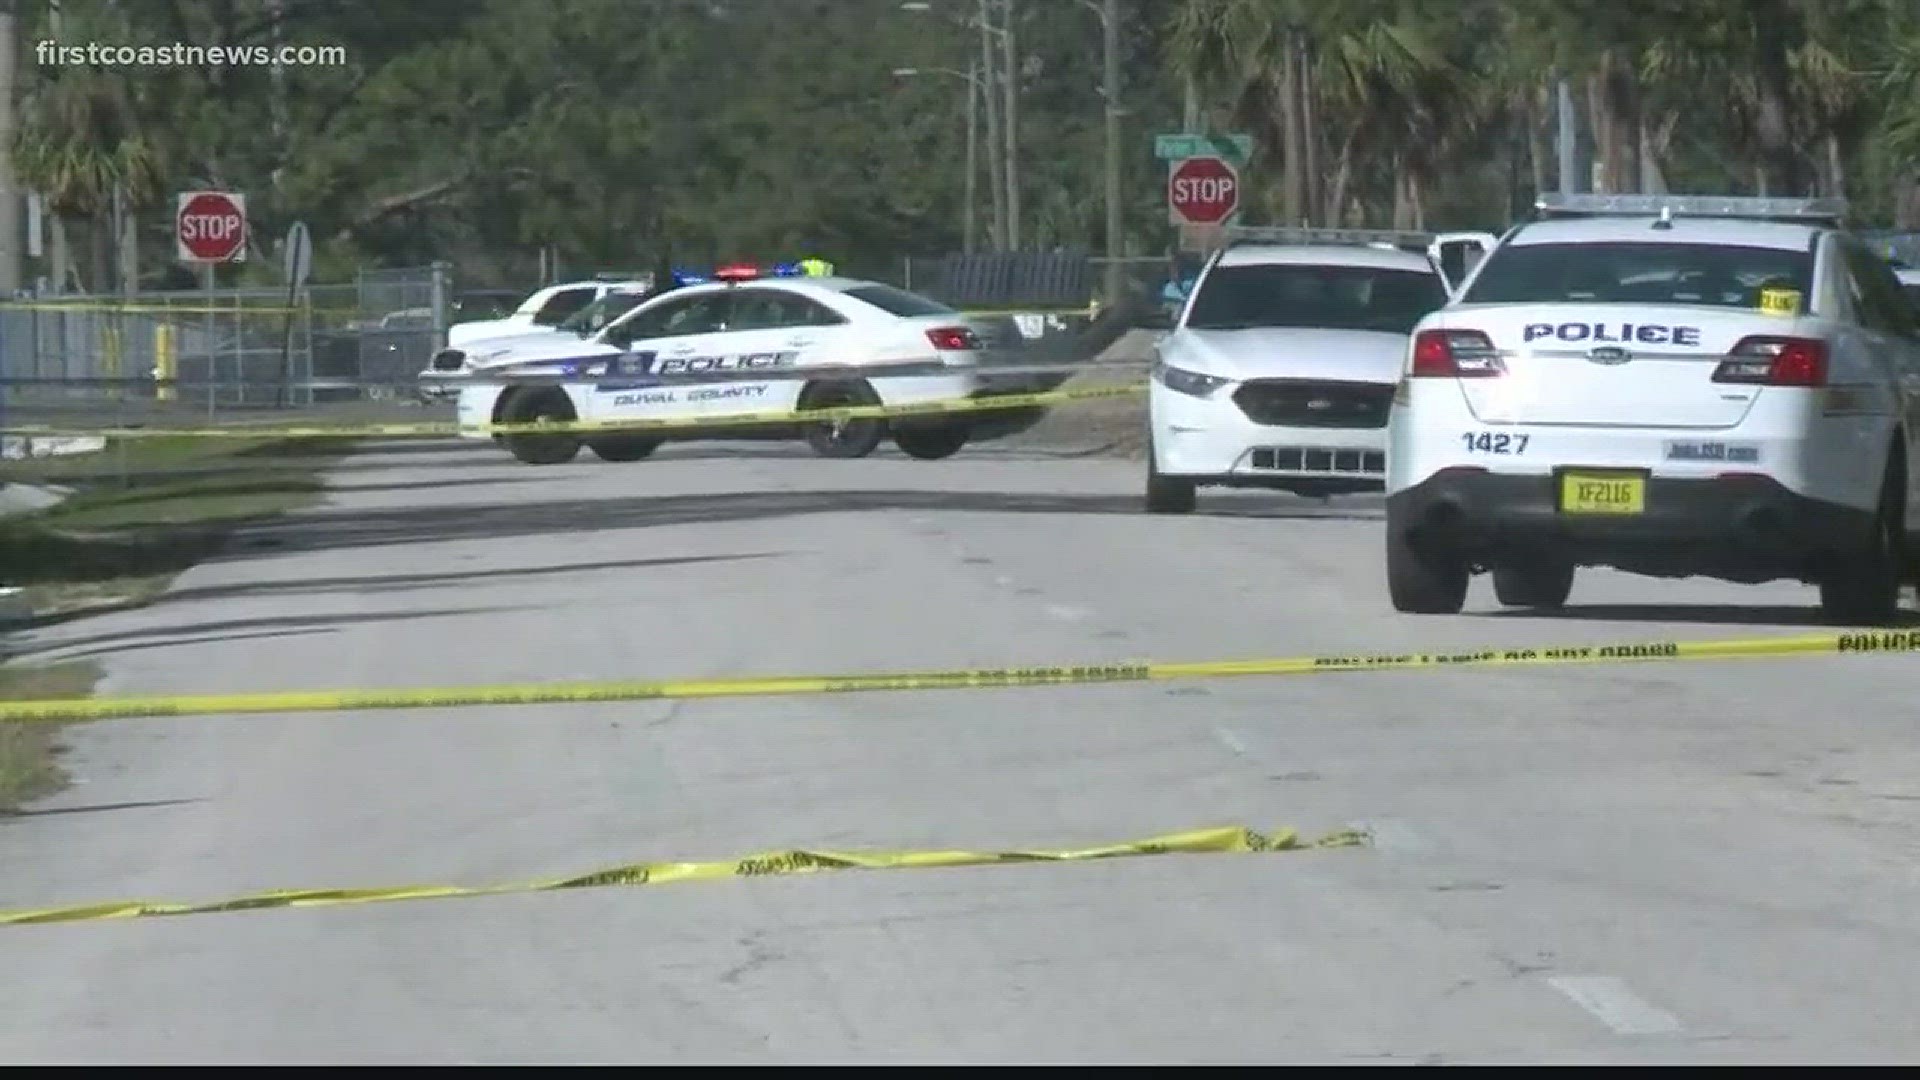 A teenager was shot multiple times near Parkwood Heights Elementary School in the Arlington area of Jacksonville Thursday, causing three Arlington schools to go on code red lockdown, police said.The shooting occurred as the 17-year-old victim was walkin